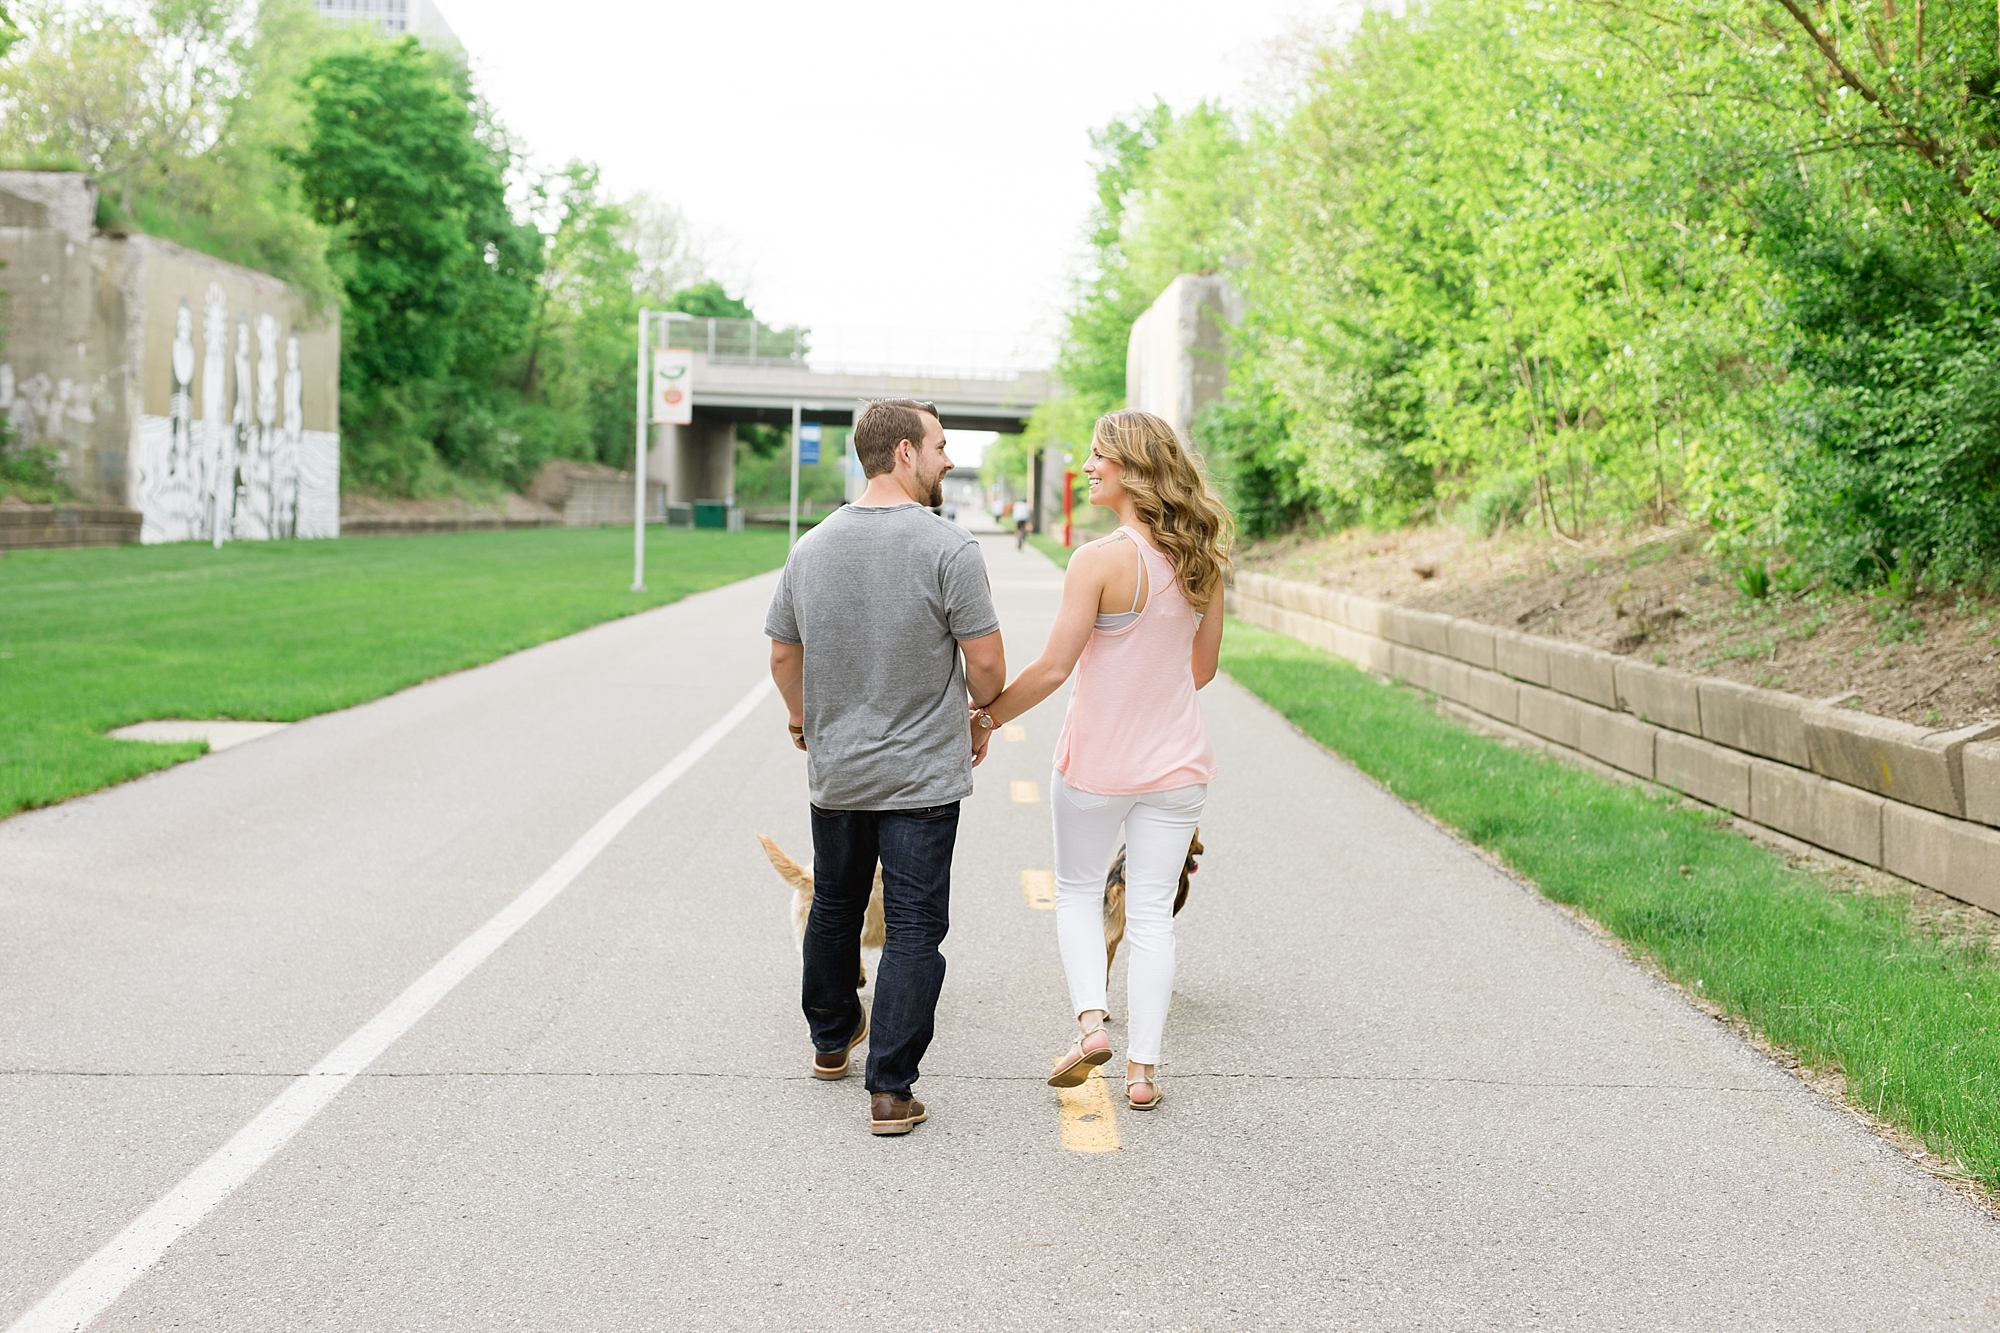 A lovely sunset May engagement session at Belle Isle and Dequindre Cut in Downtown Detroit, Michigan by Breanne Rochelle Photography.